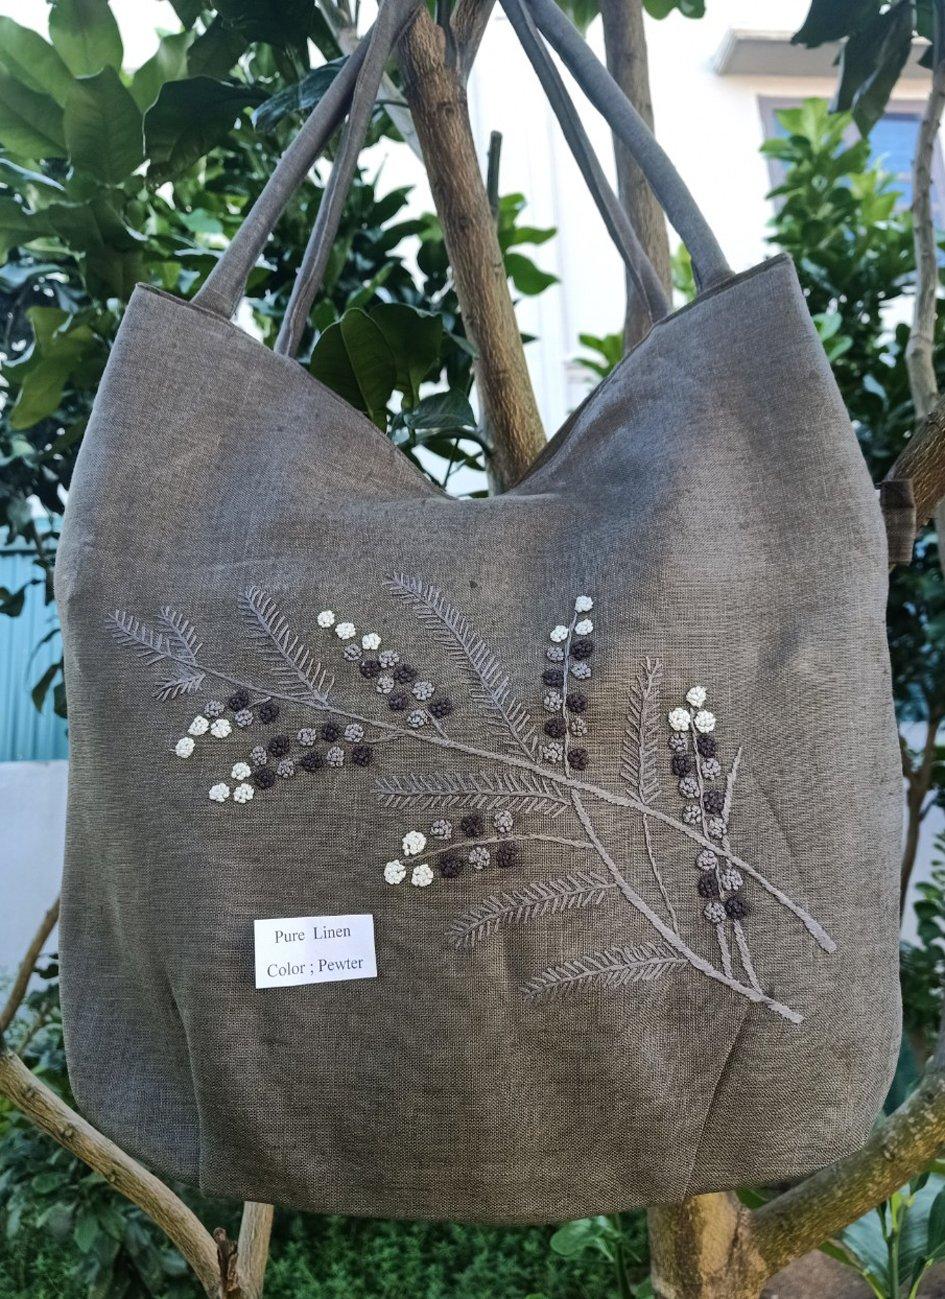 Hand bags linen  color  Pewter 